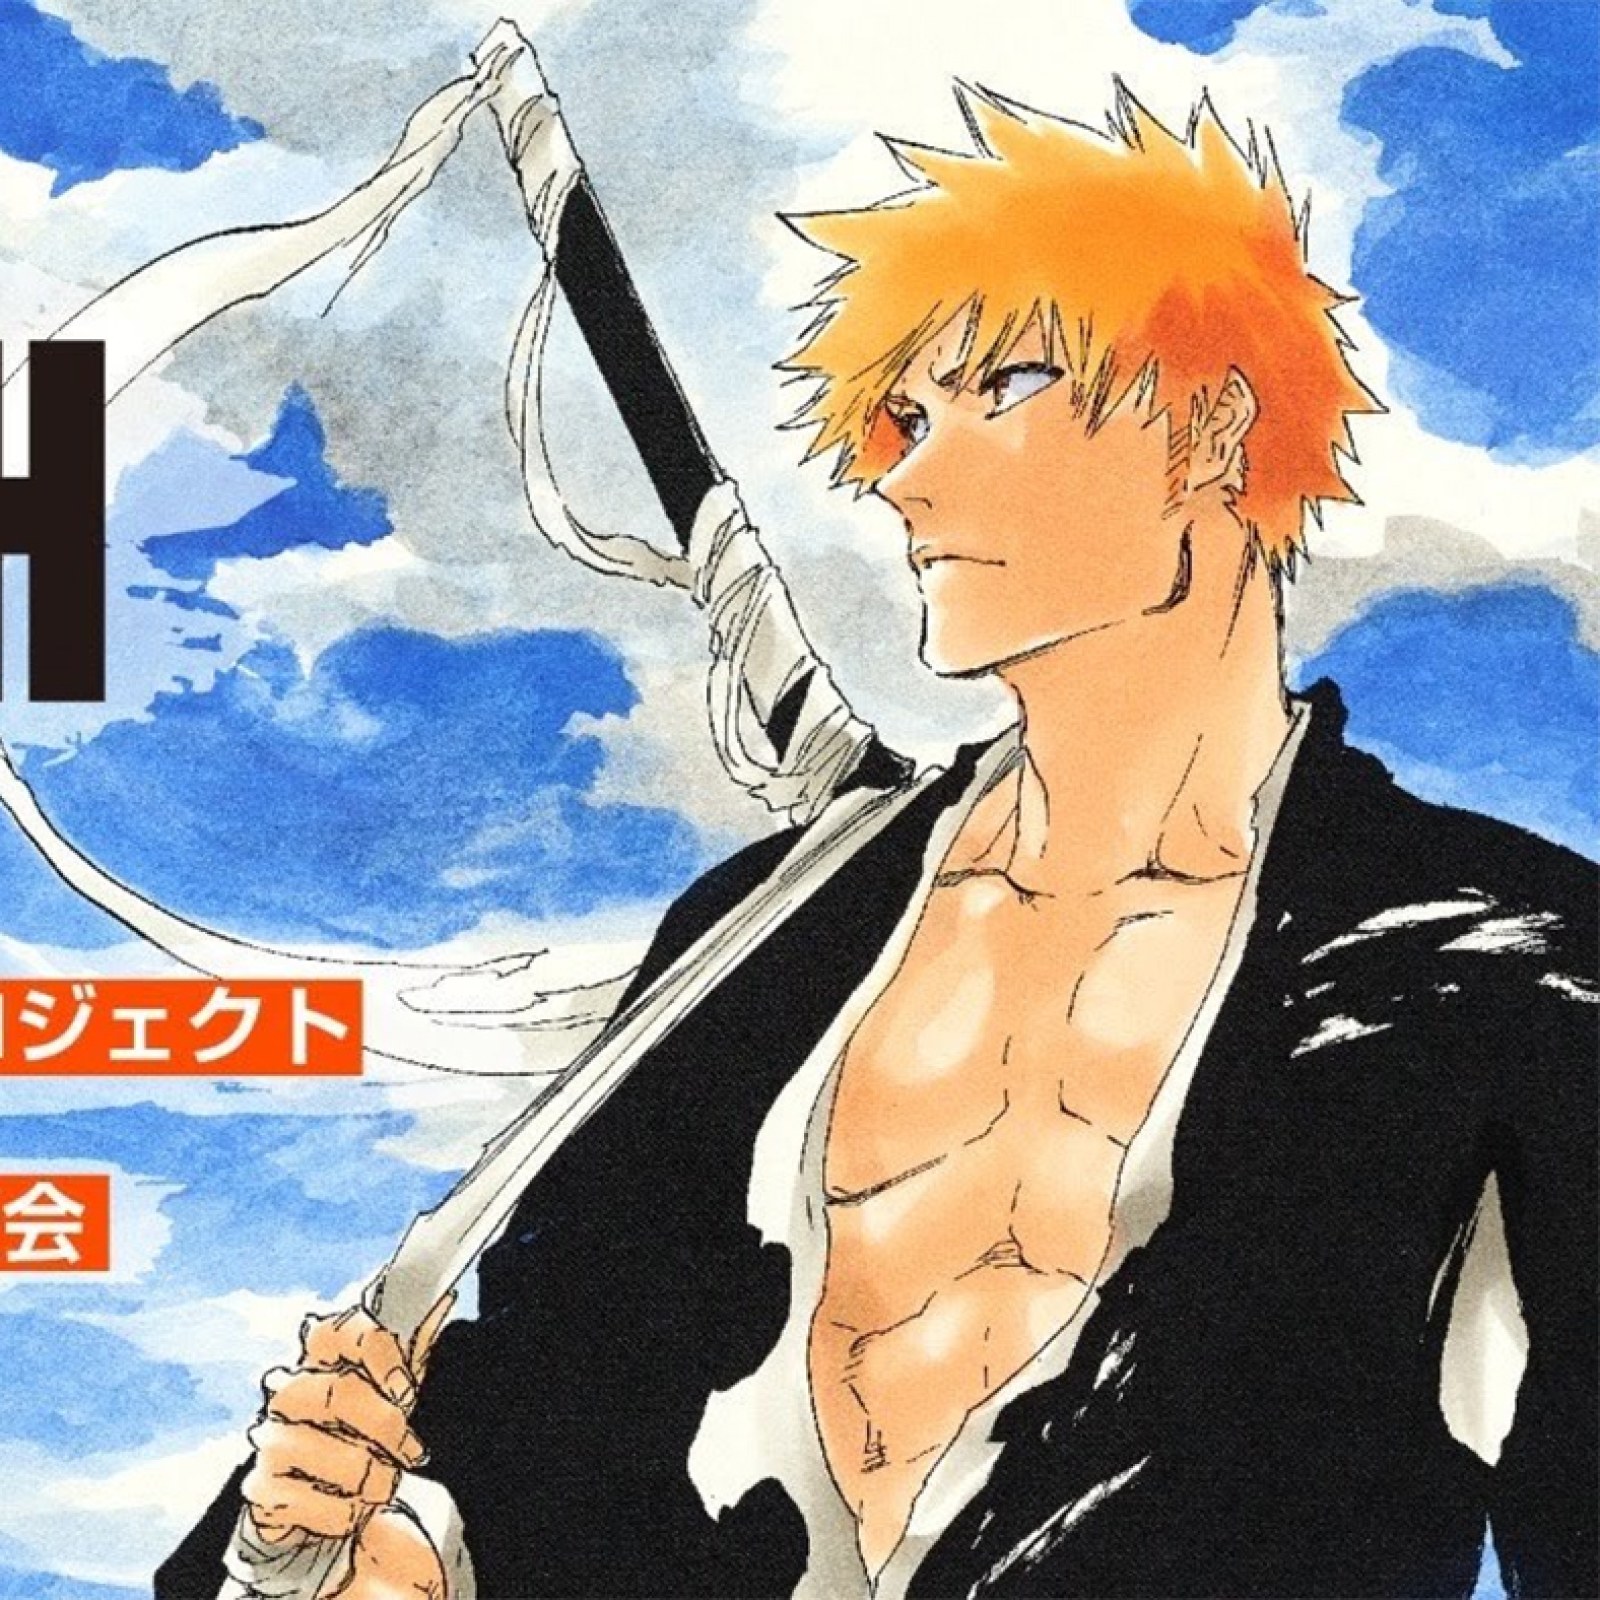 Best Manga To Read 2021 Bleach' Anime to Return in 2021; 'Burn the Witch' Gets 